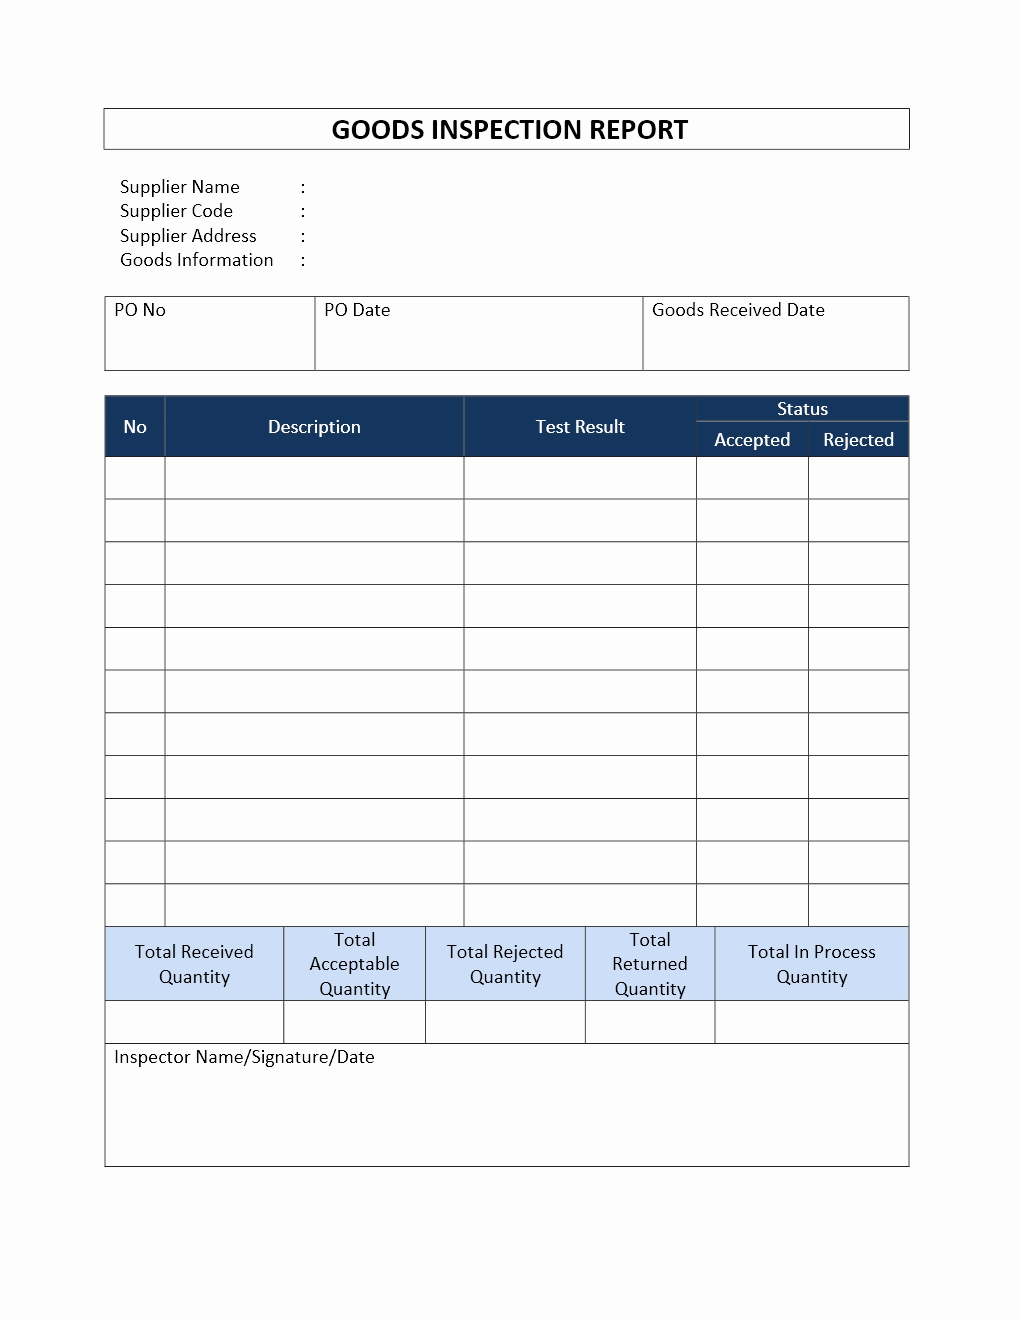 Home Inspection Report Template Unique In Ing Goods Inspection Report